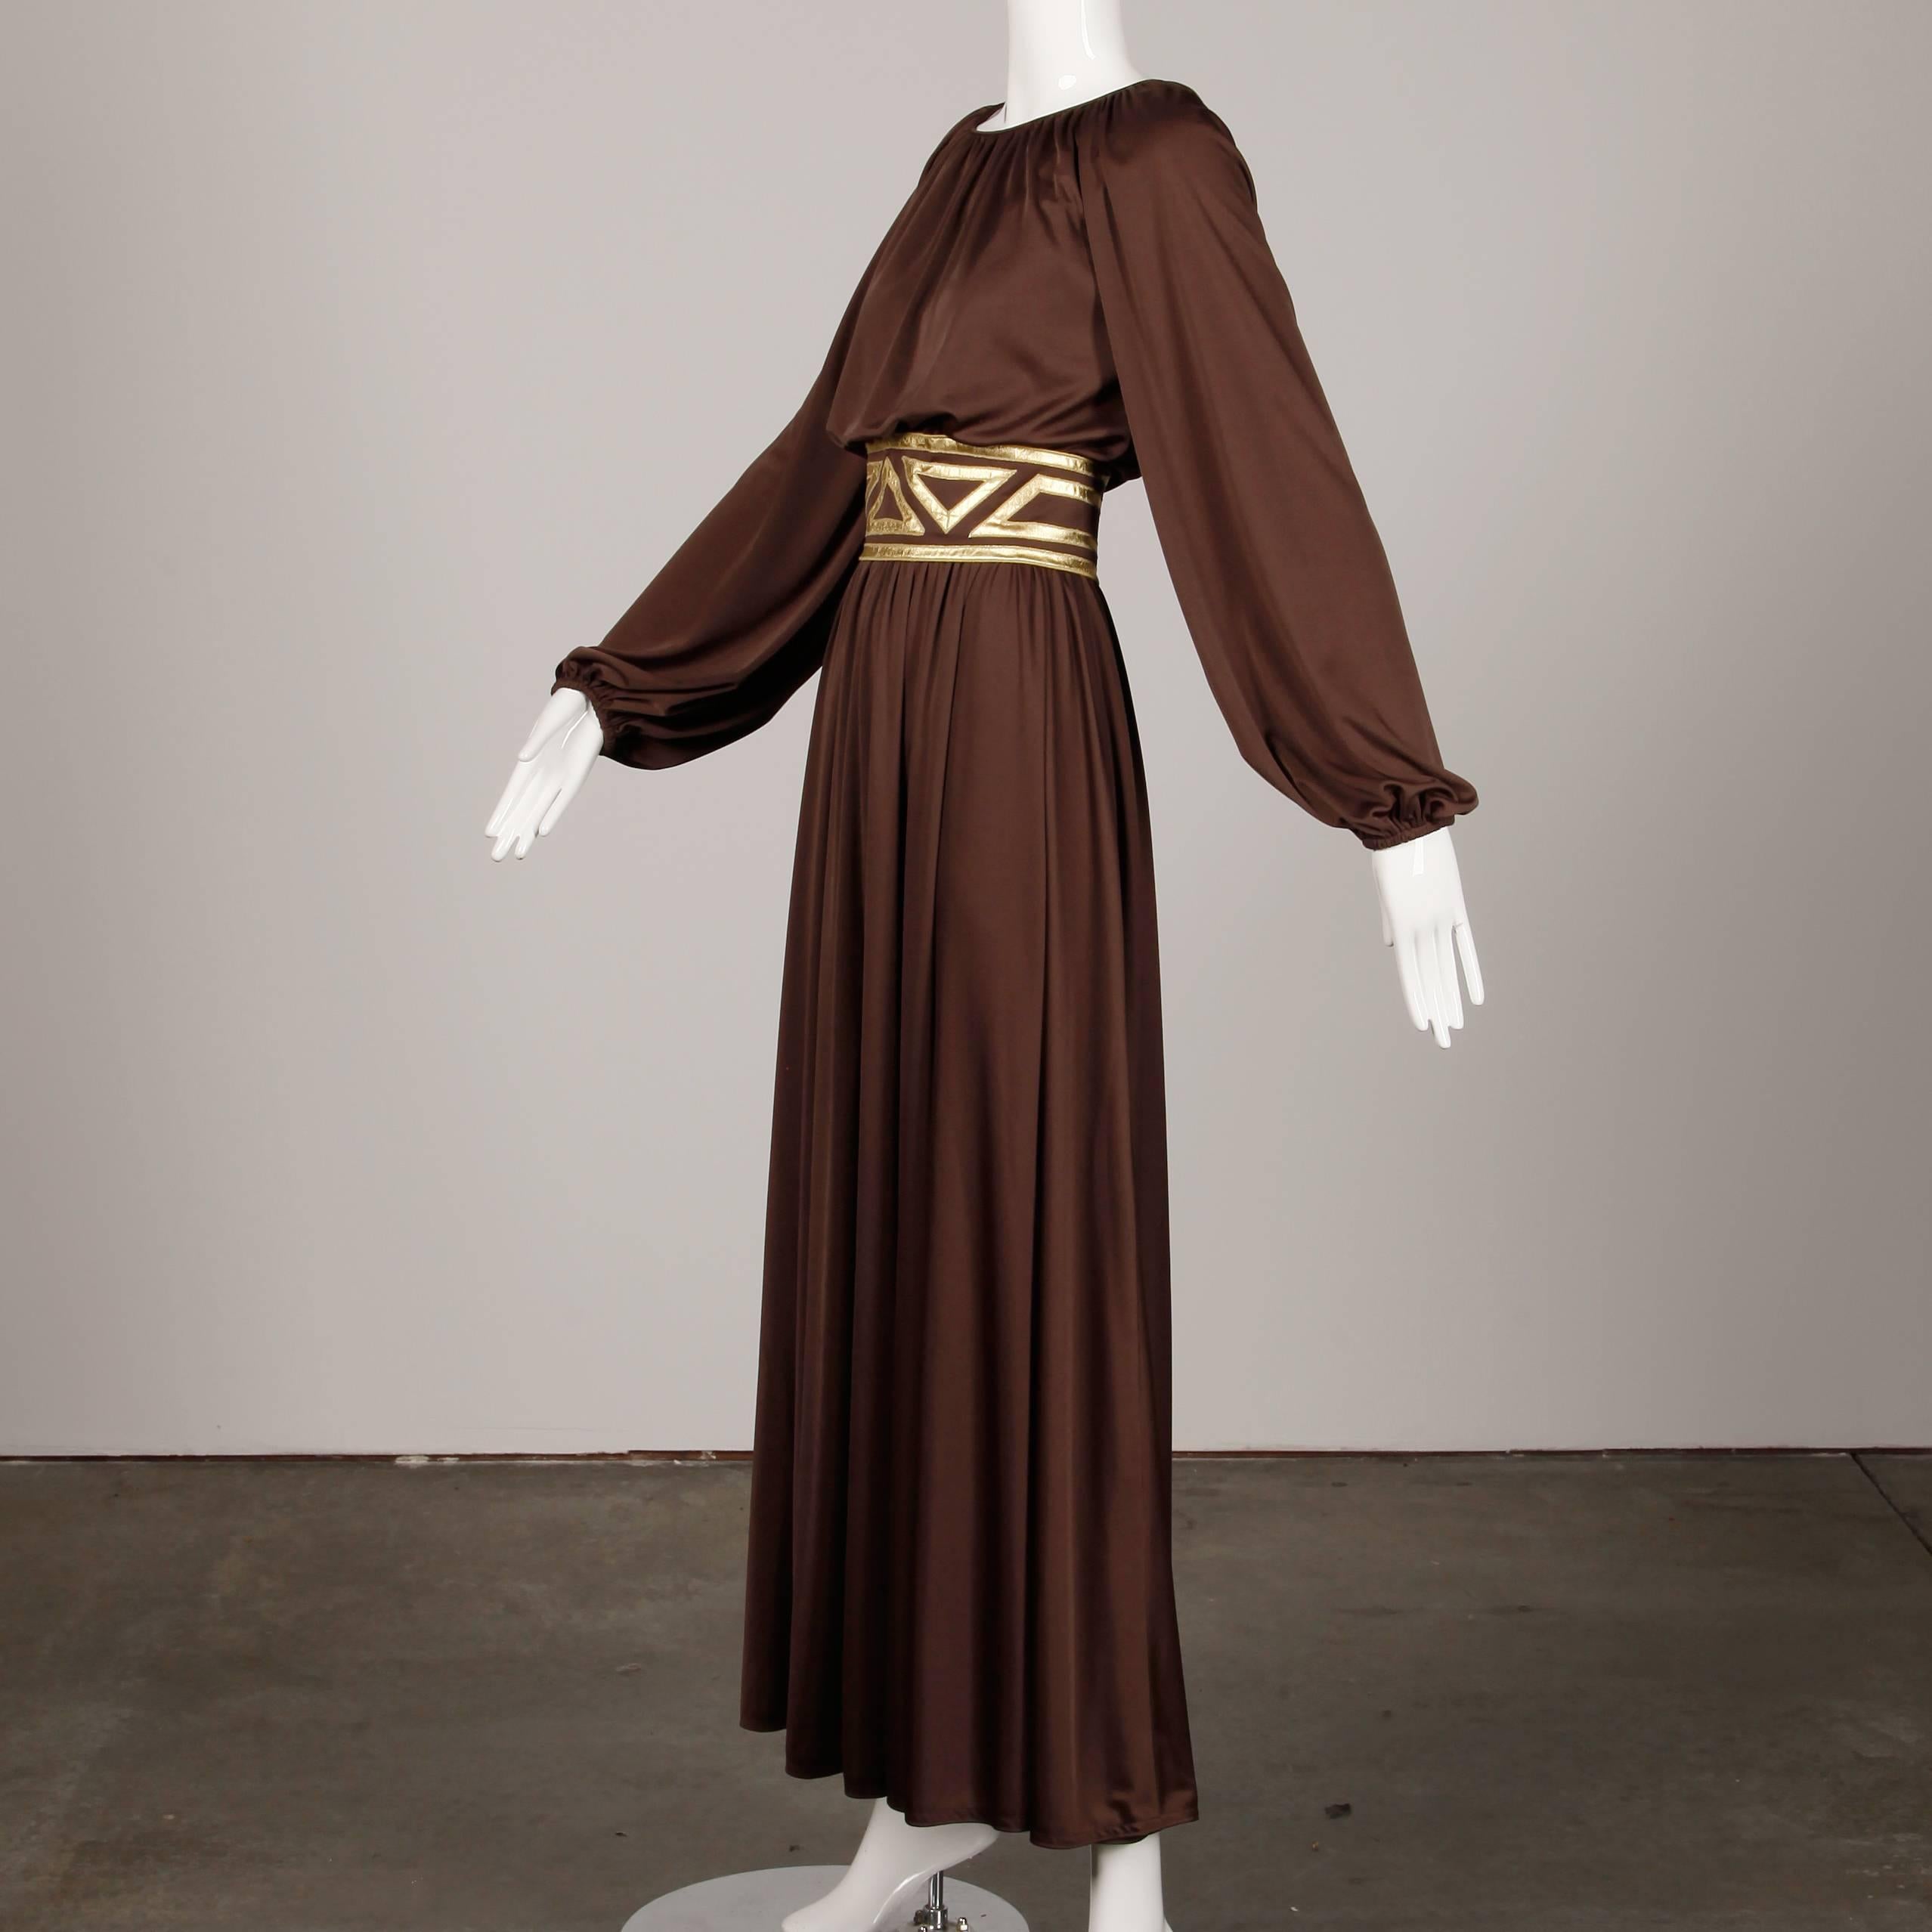 Grecian-inspired vintage 1970s chocolate brown jersey knit maxi dress with metallic gold waistband by Rizkallah for Don Friese. Partially lined with rear zip, hook, snap and button closure. Fits like a modern size small-medium. Measurement for bust